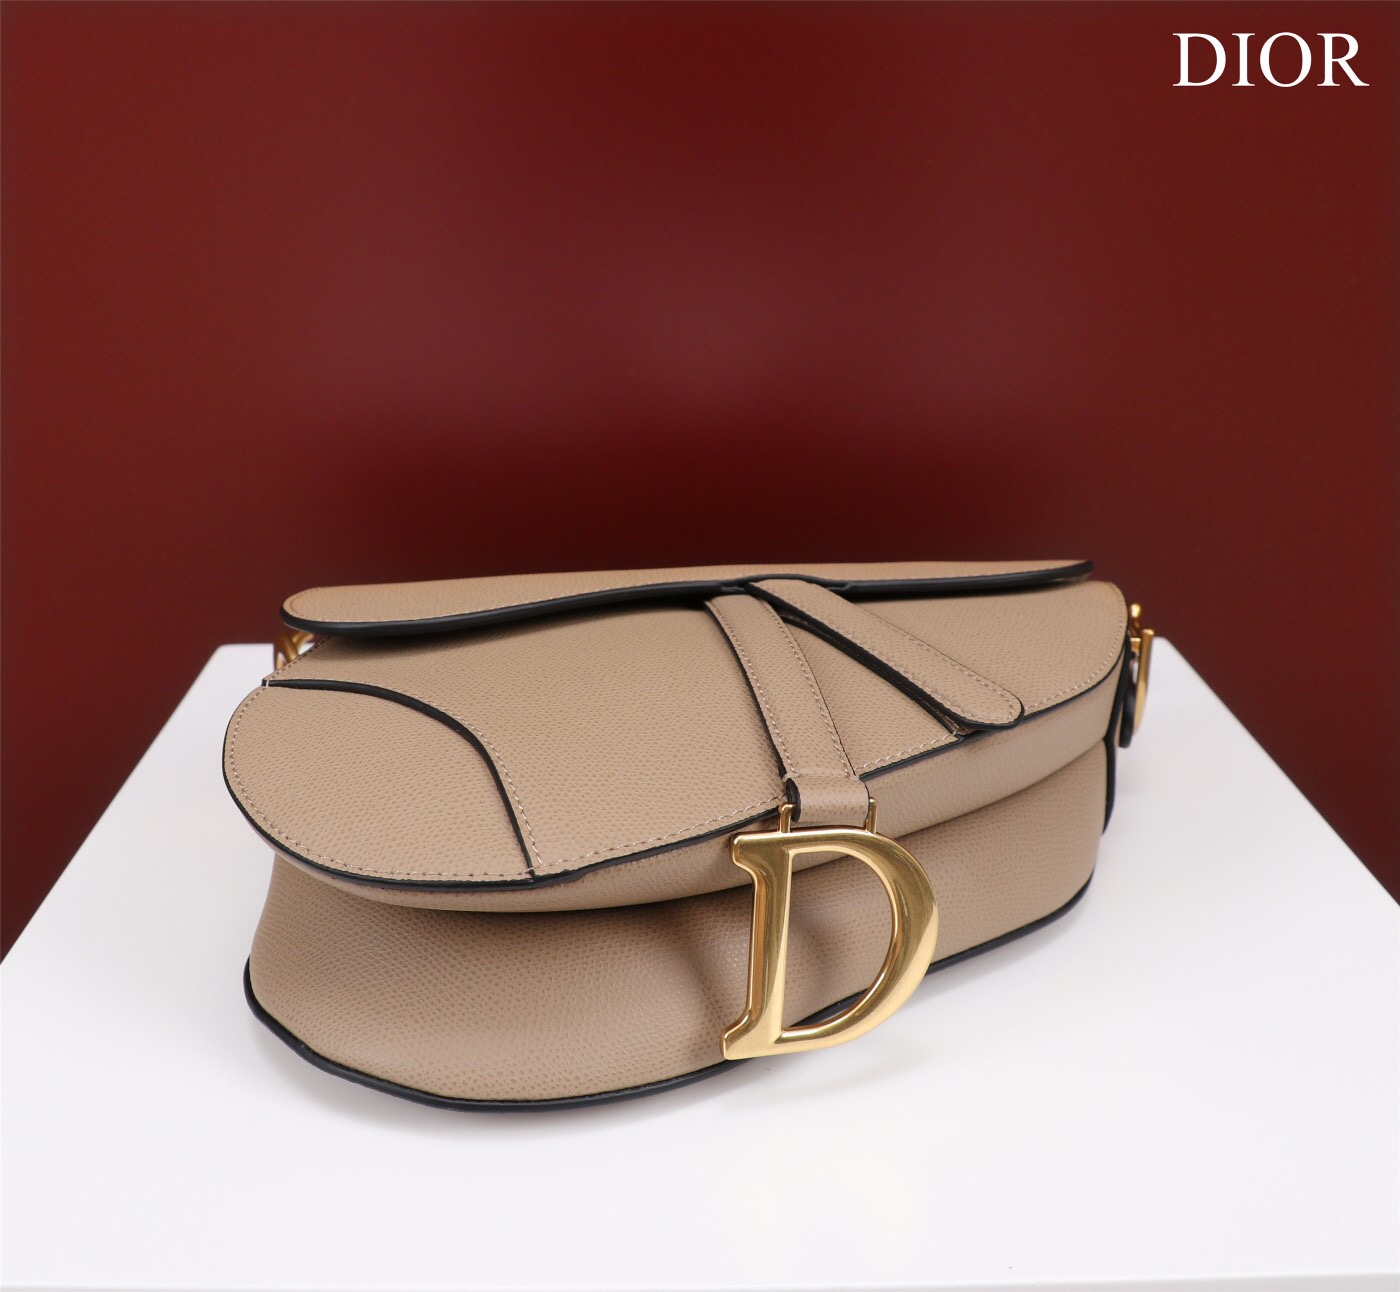 DIOR SADDLE BAG WITH STRAP Sand Pink Grained Calfskin M0455CBA